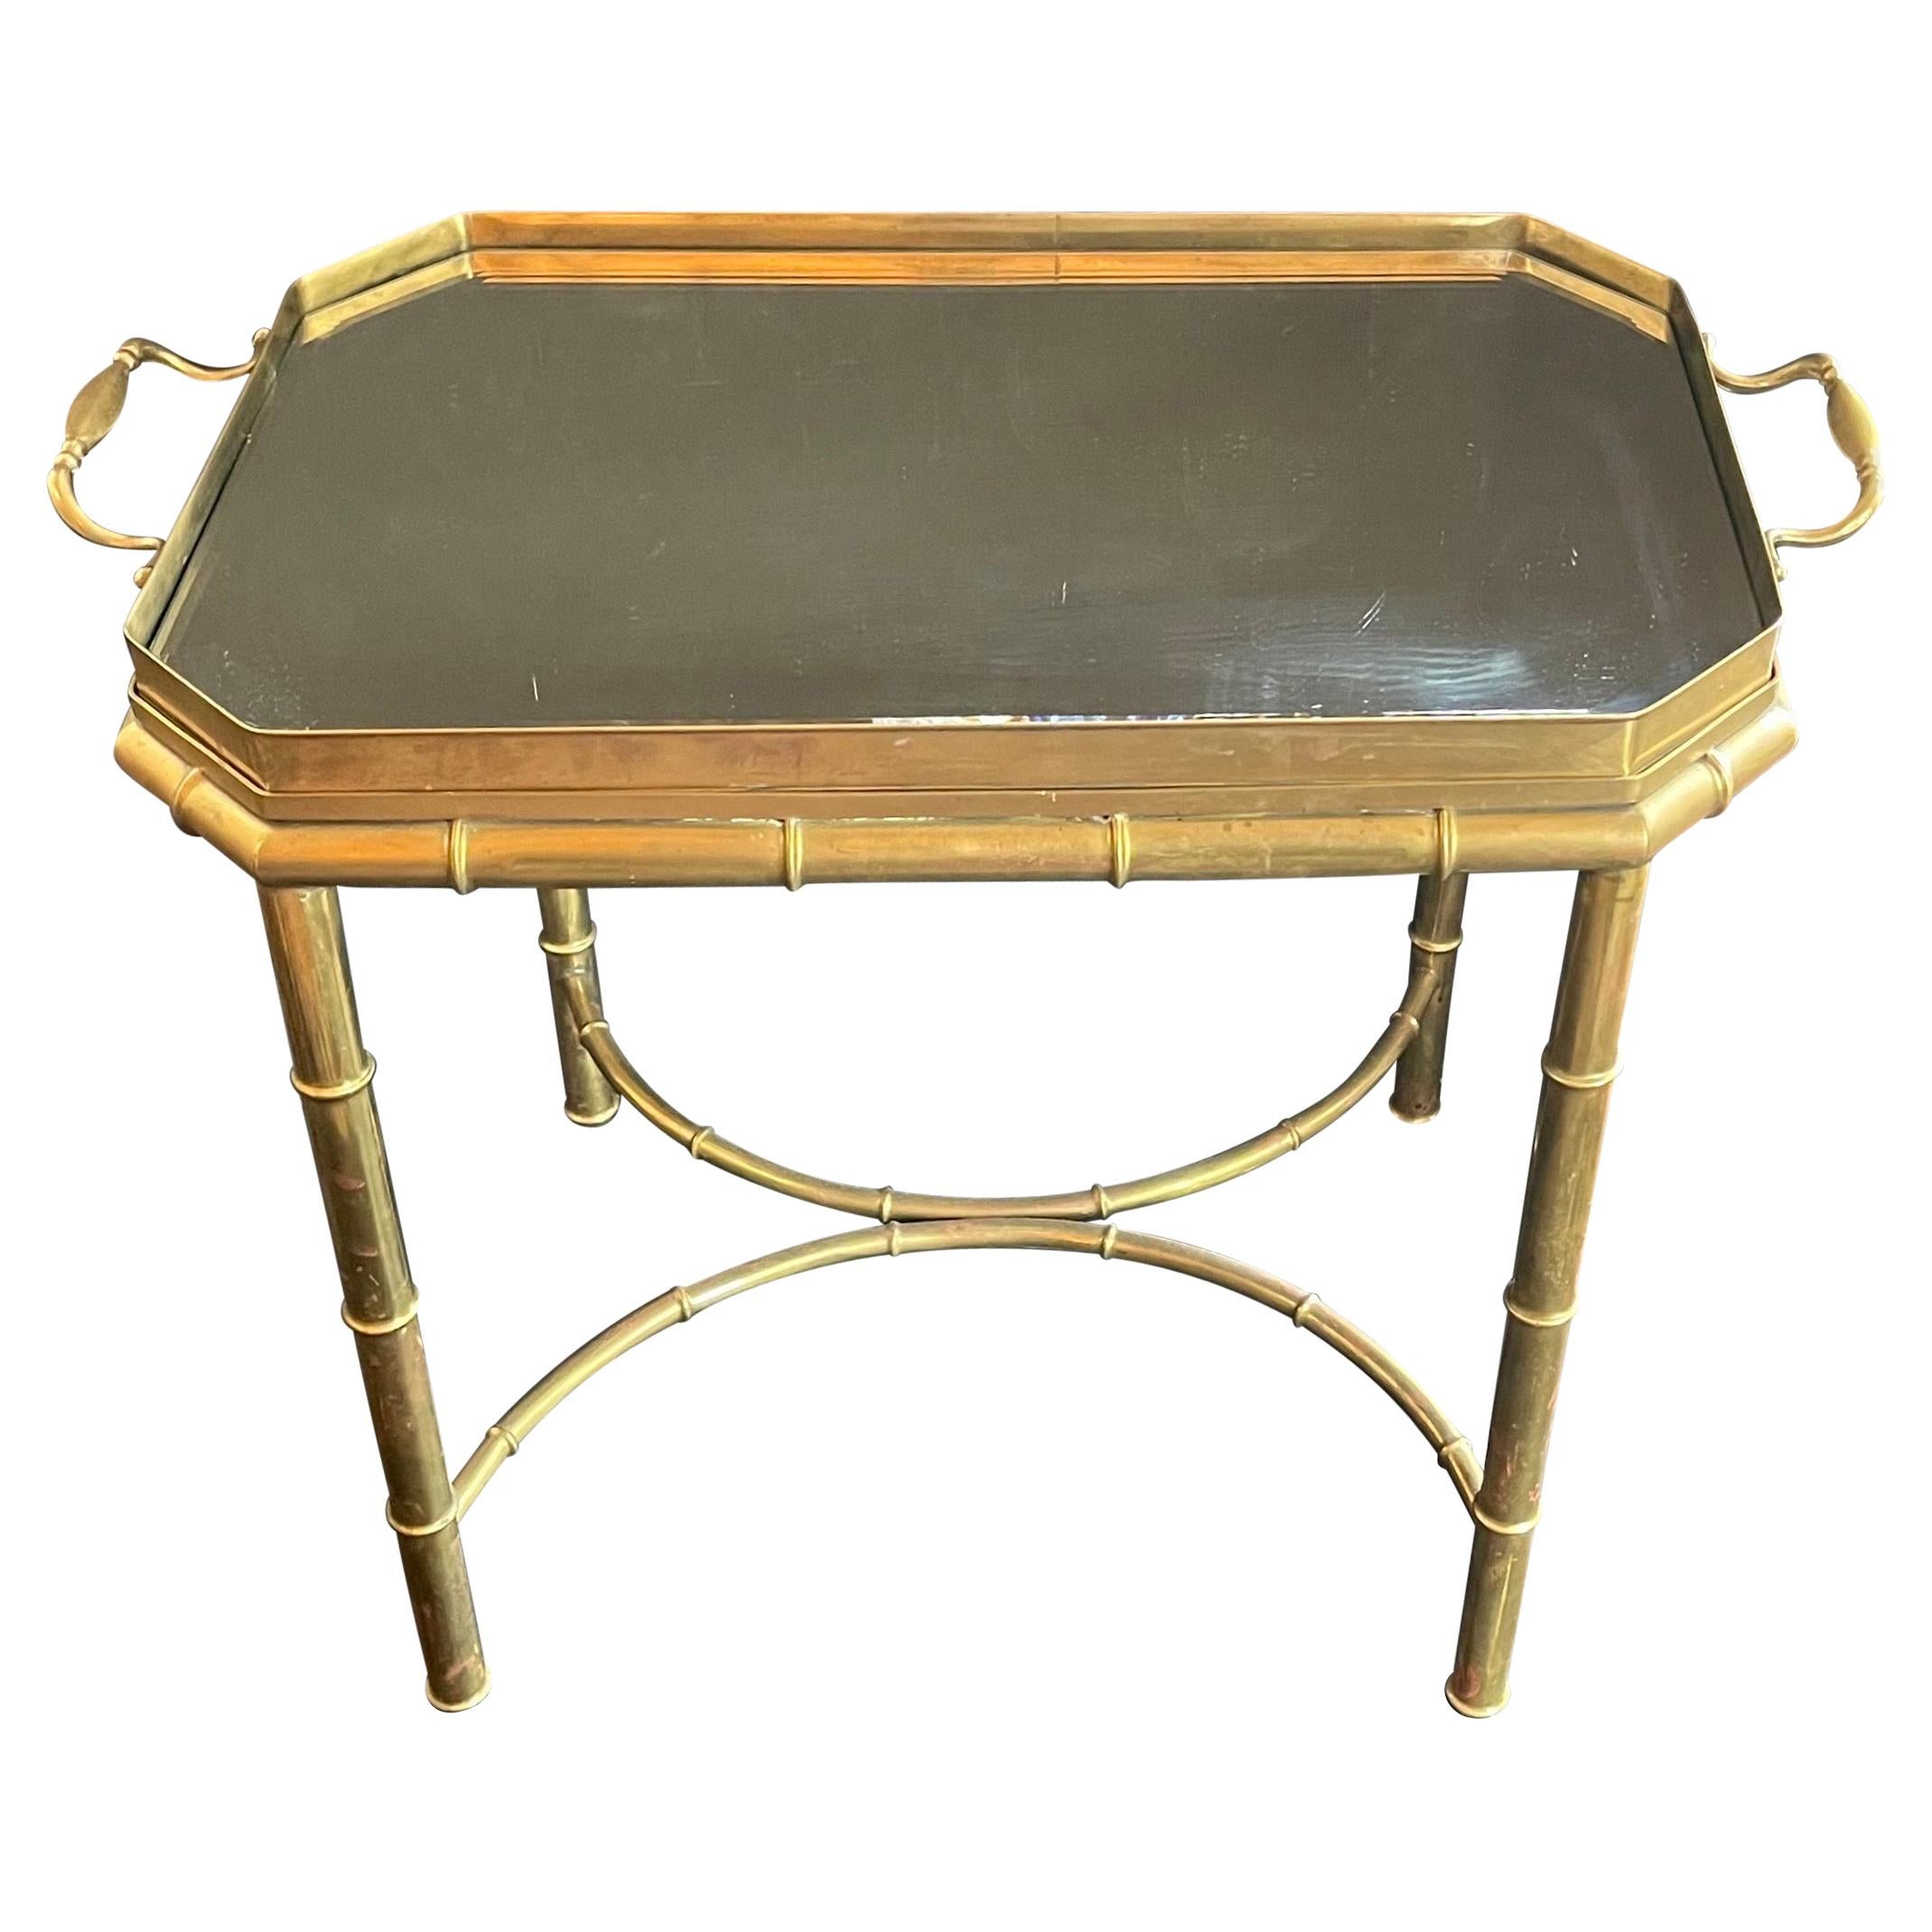 Wonderful Brass Bronze Faux Bamboo Beveled Mirror Gallery Tray Top Coffee Table